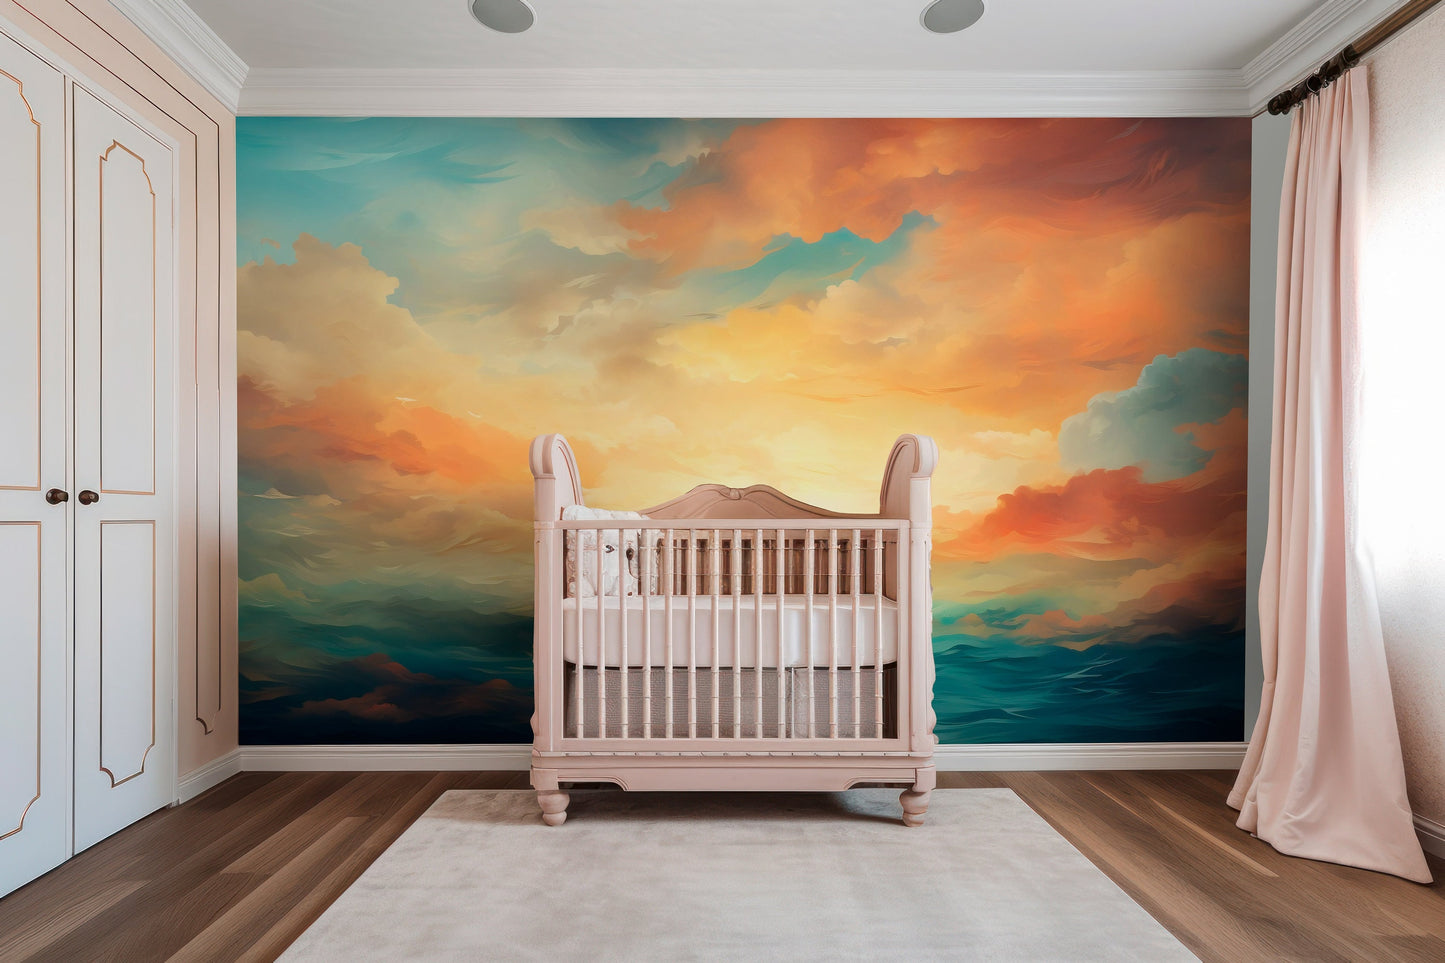 Wallpaper with Sunset Scenery - Easy Install